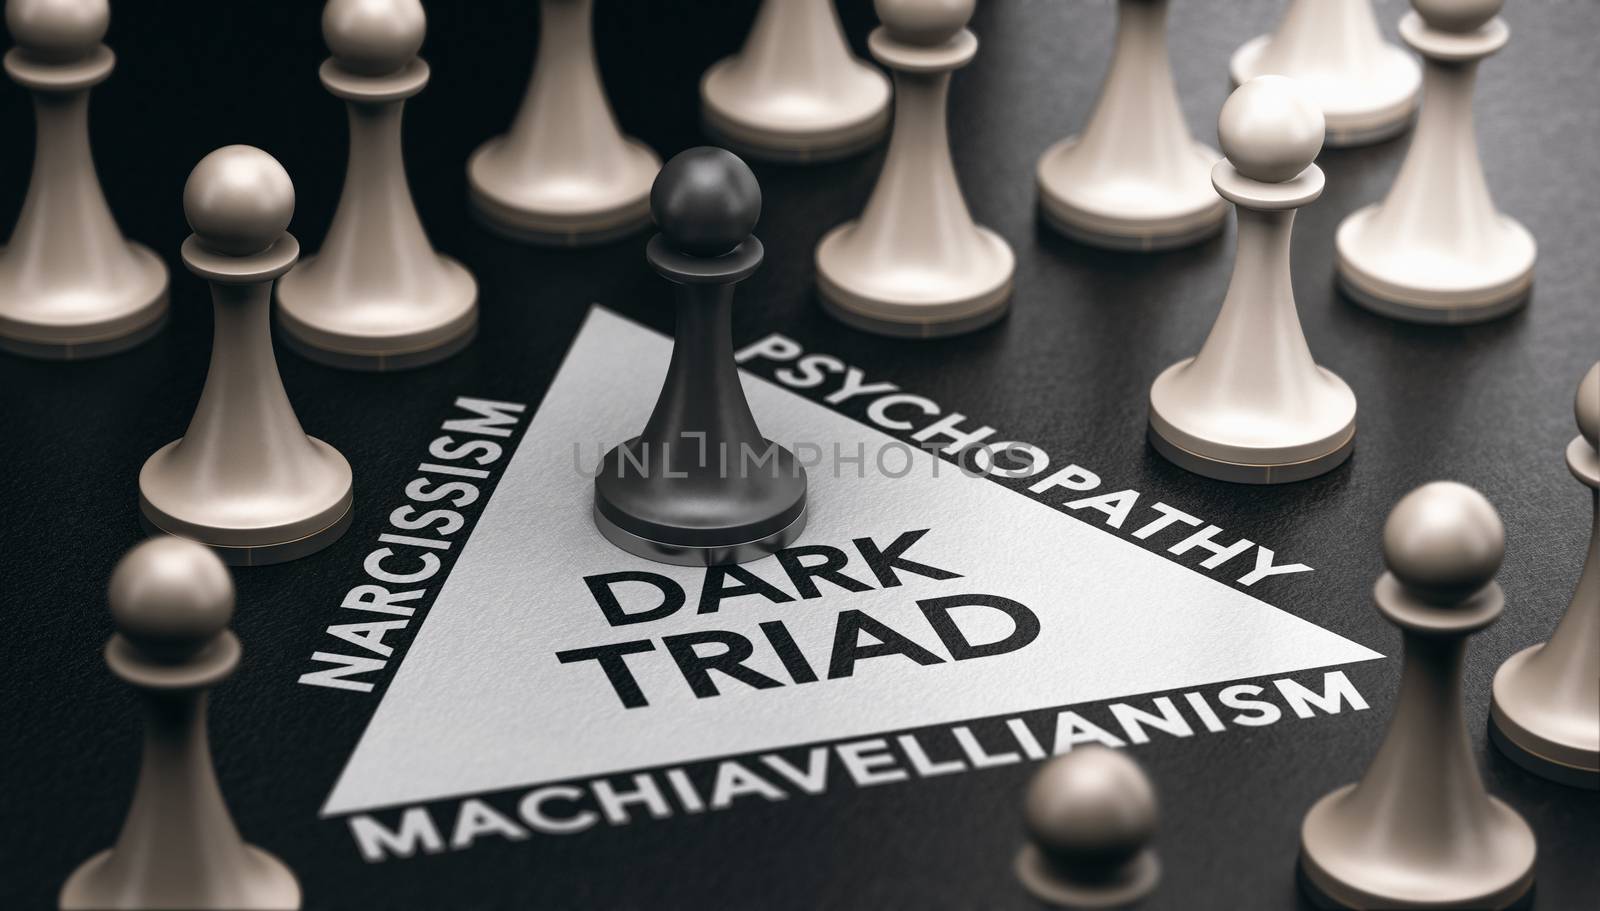 Dark triad, anti-social personality disorder. Psychology concept by Olivier-Le-Moal